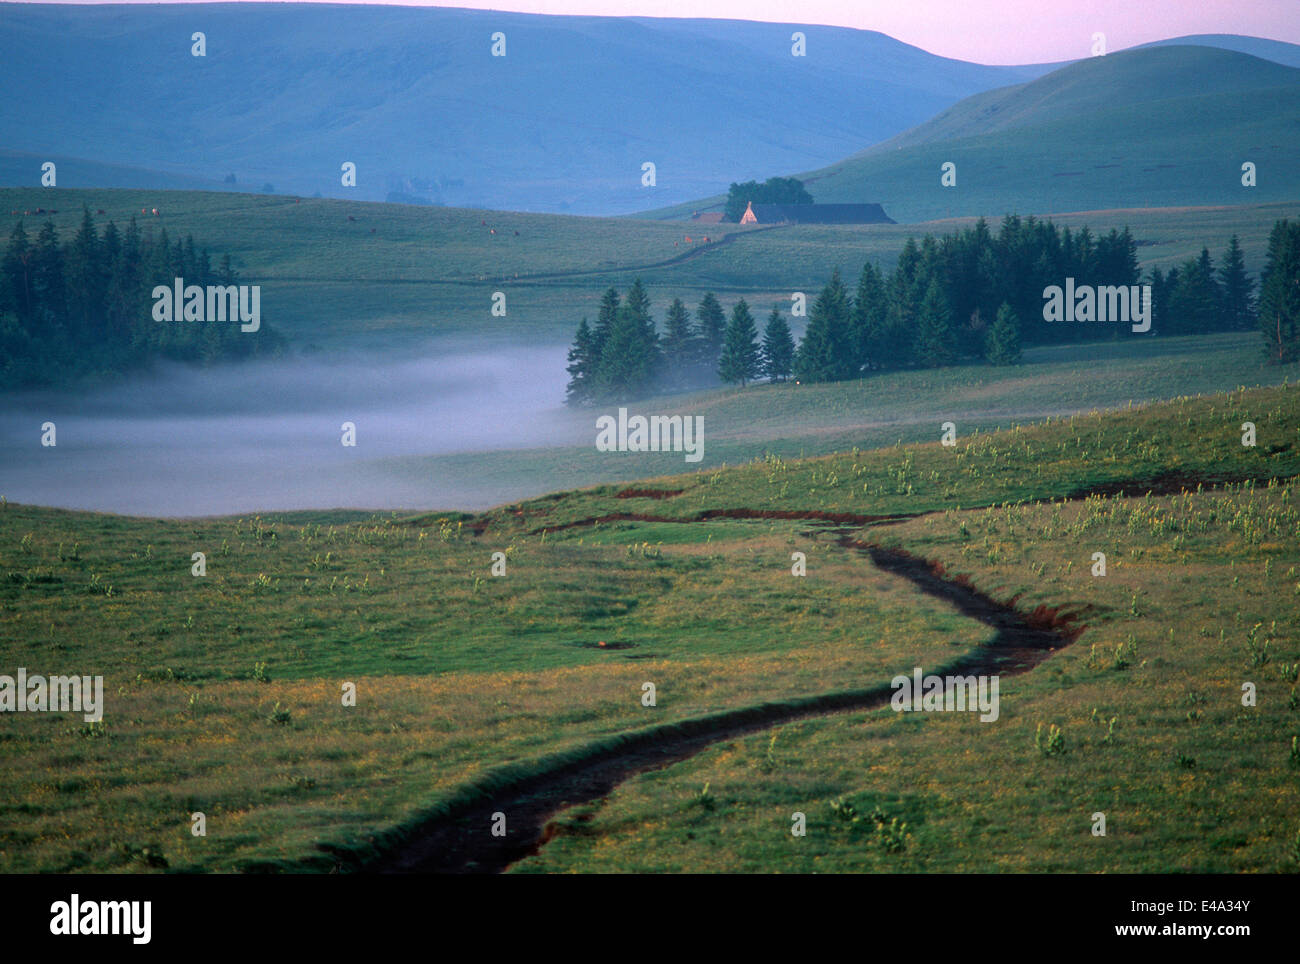 Misty morning in the Massif Central mountain region, Cezallier, Auvergne, France, Europe. Stock Photo